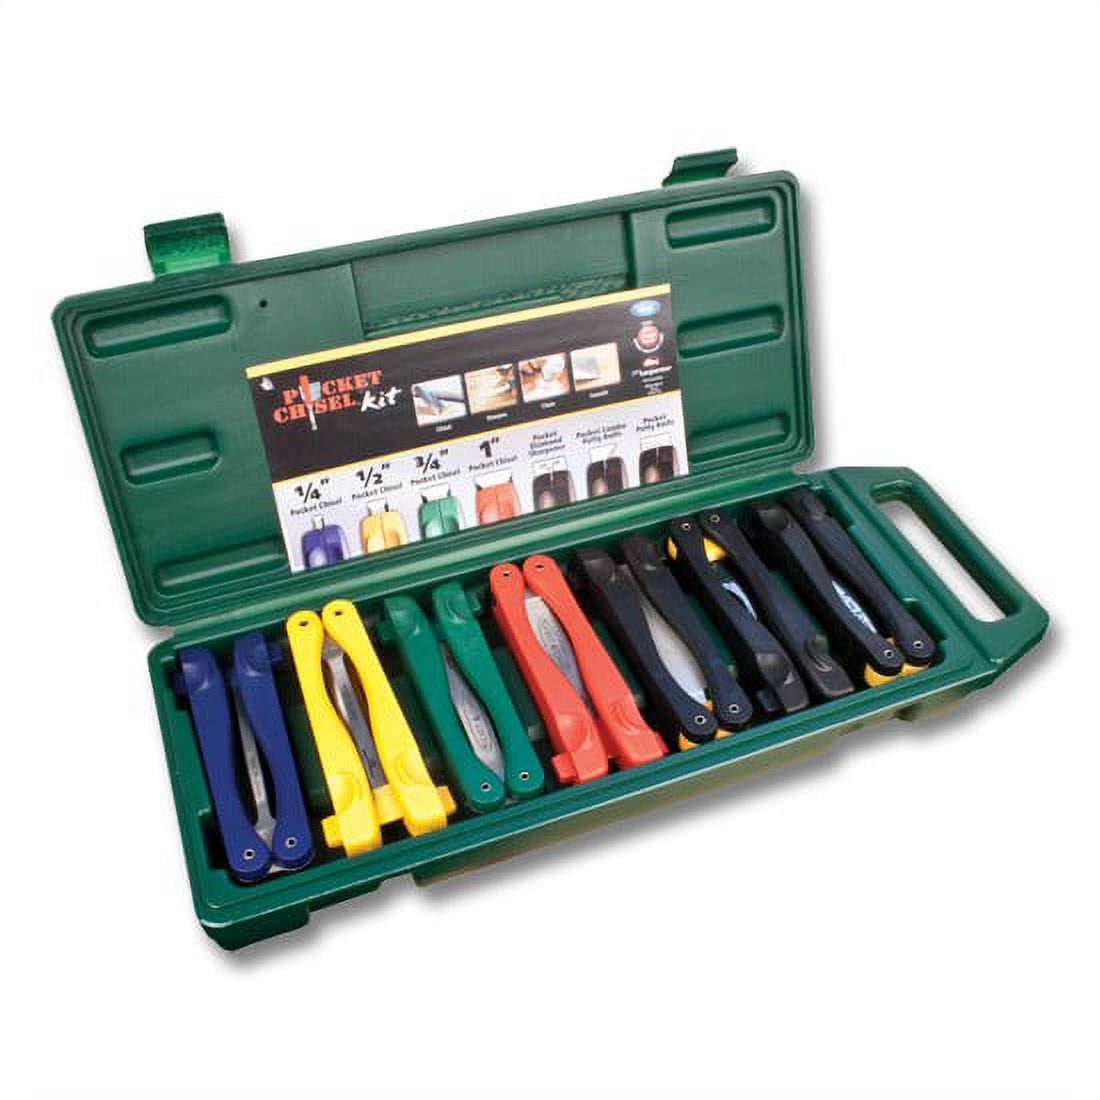 Pocket Chisel Kit Includes: PC-1 PC-3/4 PC-1/2 PC-1/4 Diamond Sharpener Putty Knife 5 in 1 Painters Tool - image 1 of 3